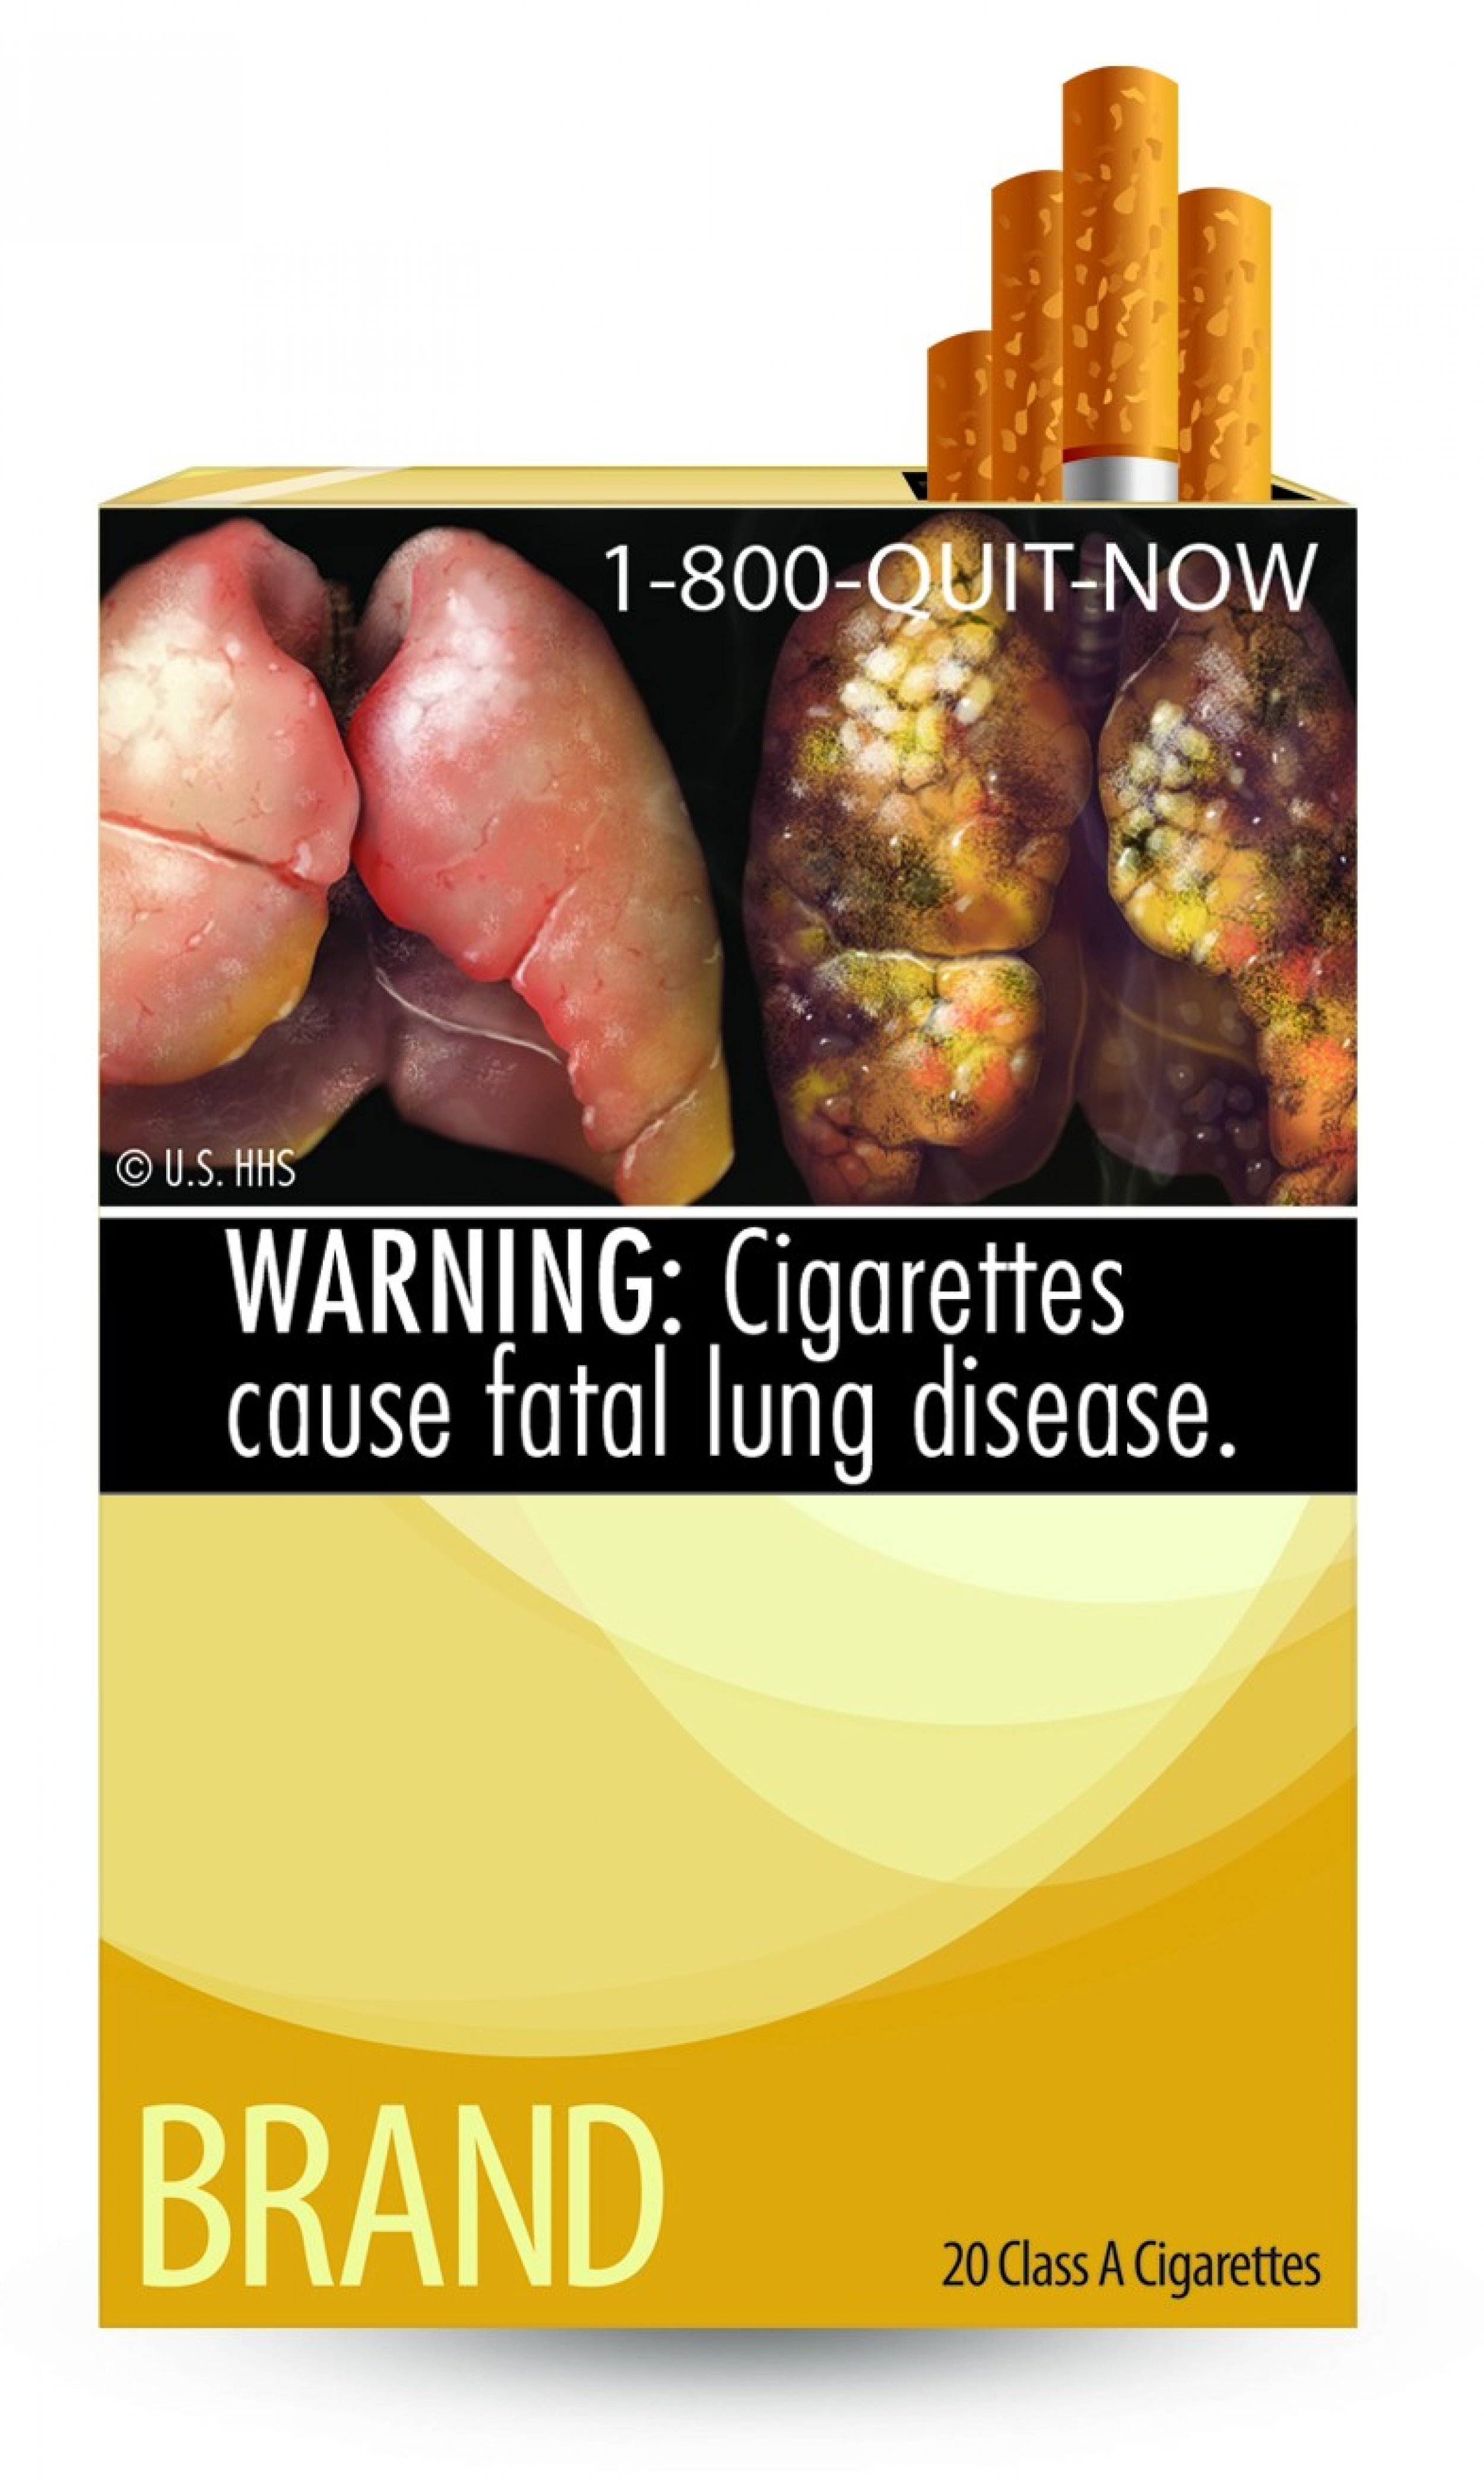 WARNING Cigarettes cause fatal lung disease.